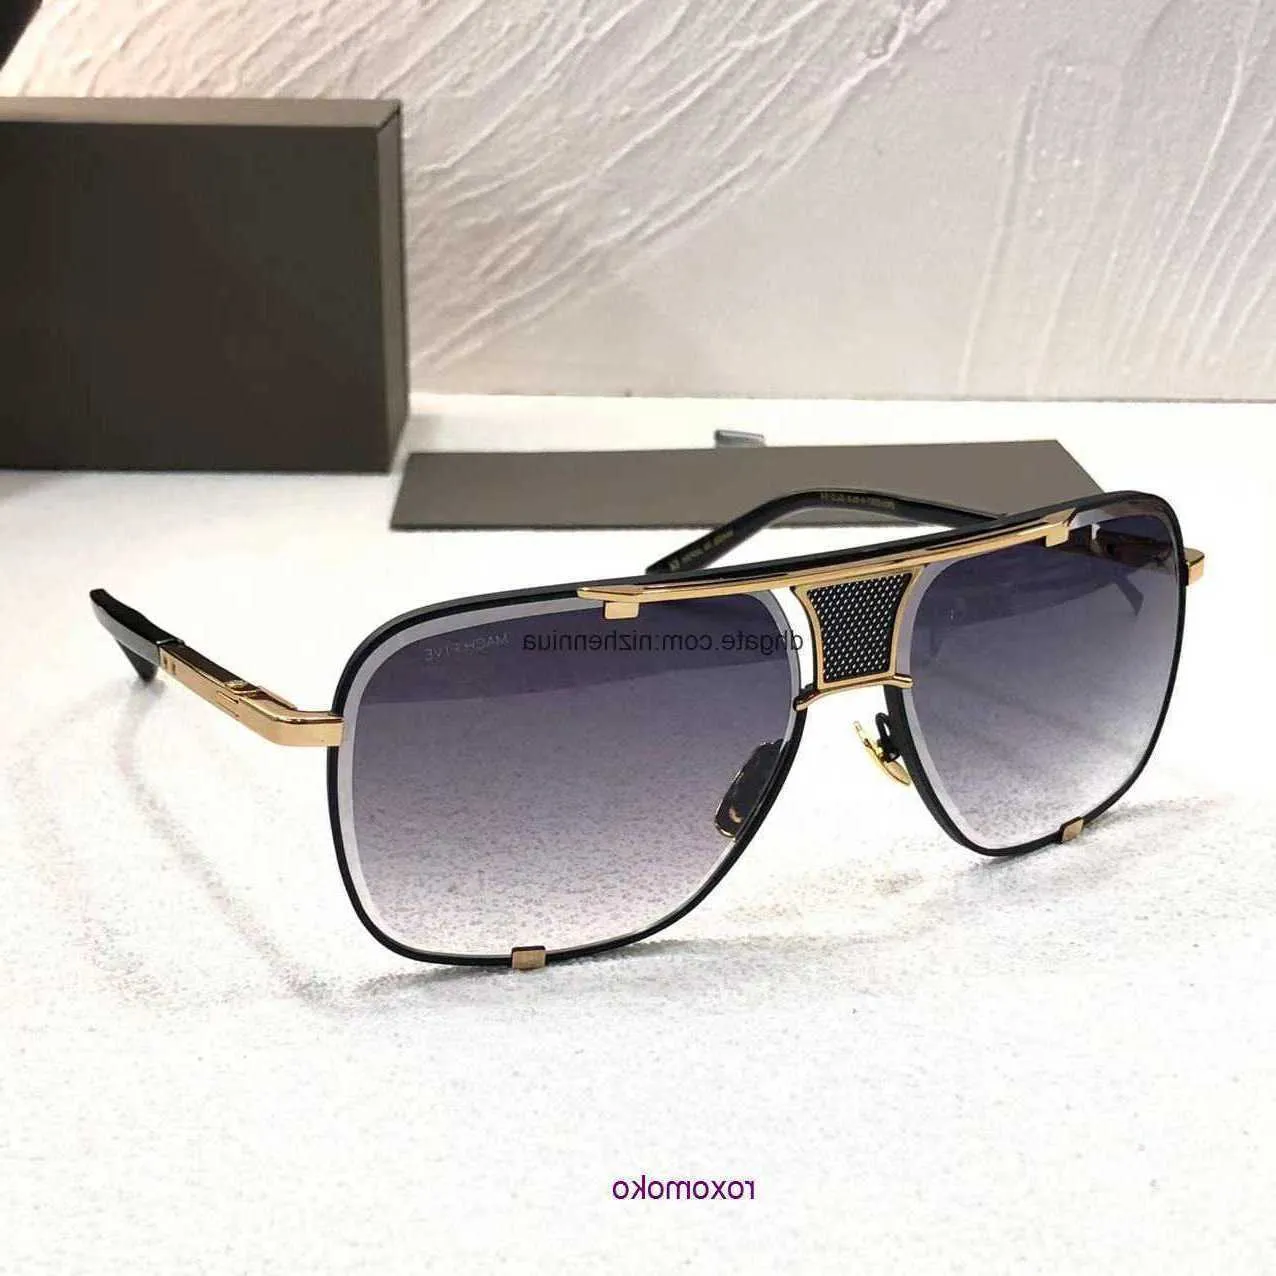 Designer a Dita Mach Five Drx 2087 Top Brand High Quality Luxury Sunglasses for Men Women New Selling World Famous Cheap Show Italian With BOX AHY2